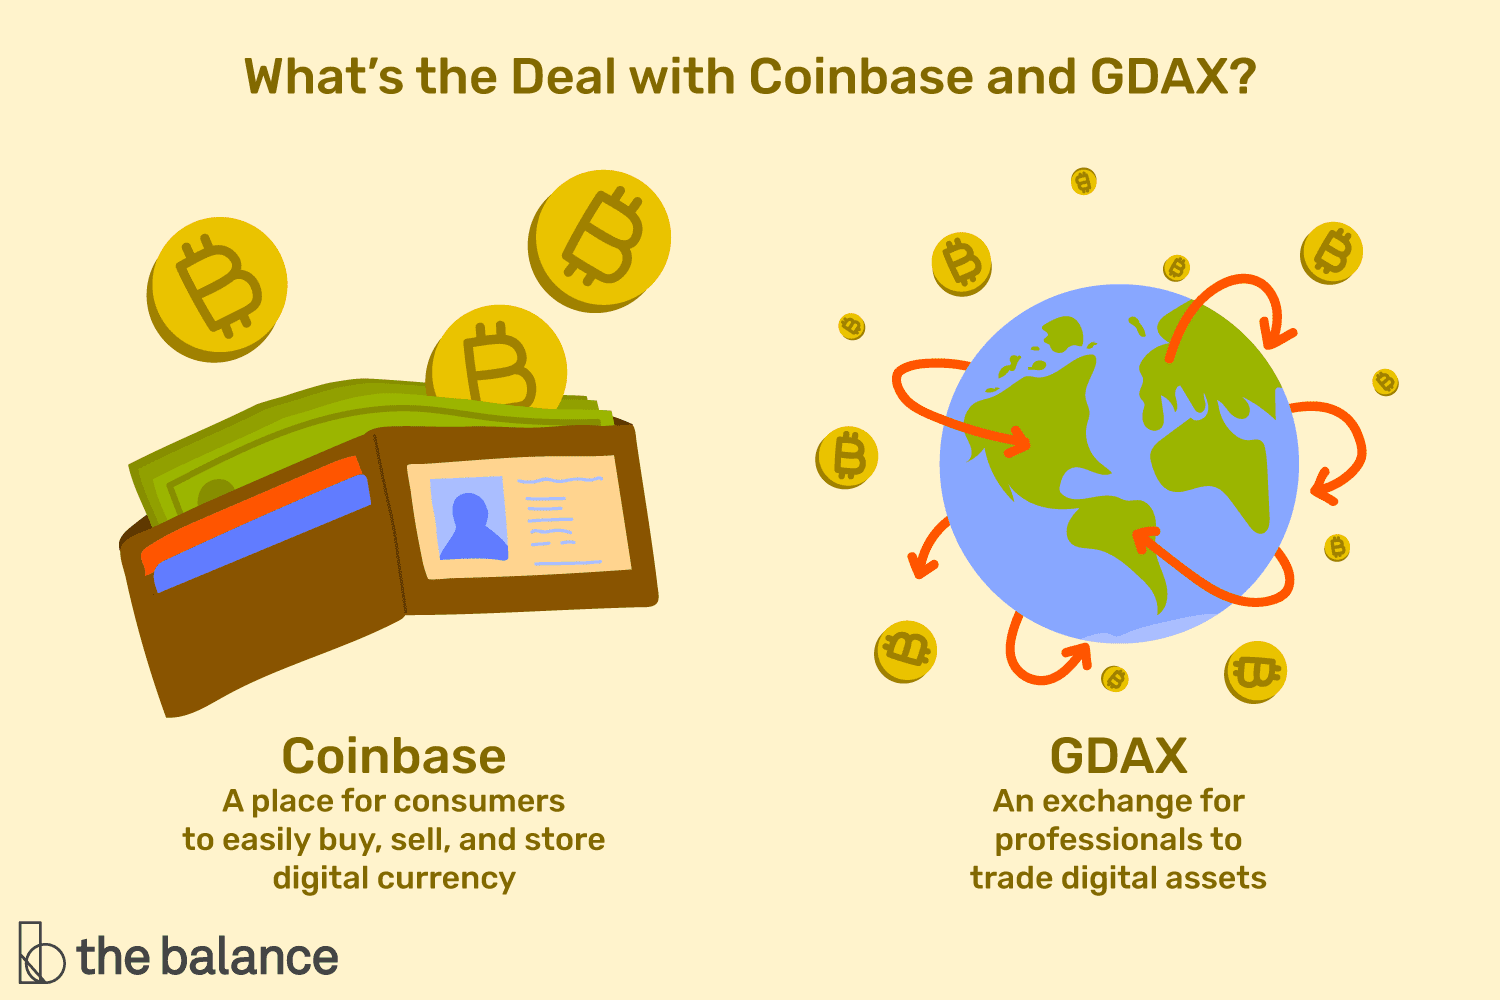 How Does Coinbase Works And Makes Money? Complete Process